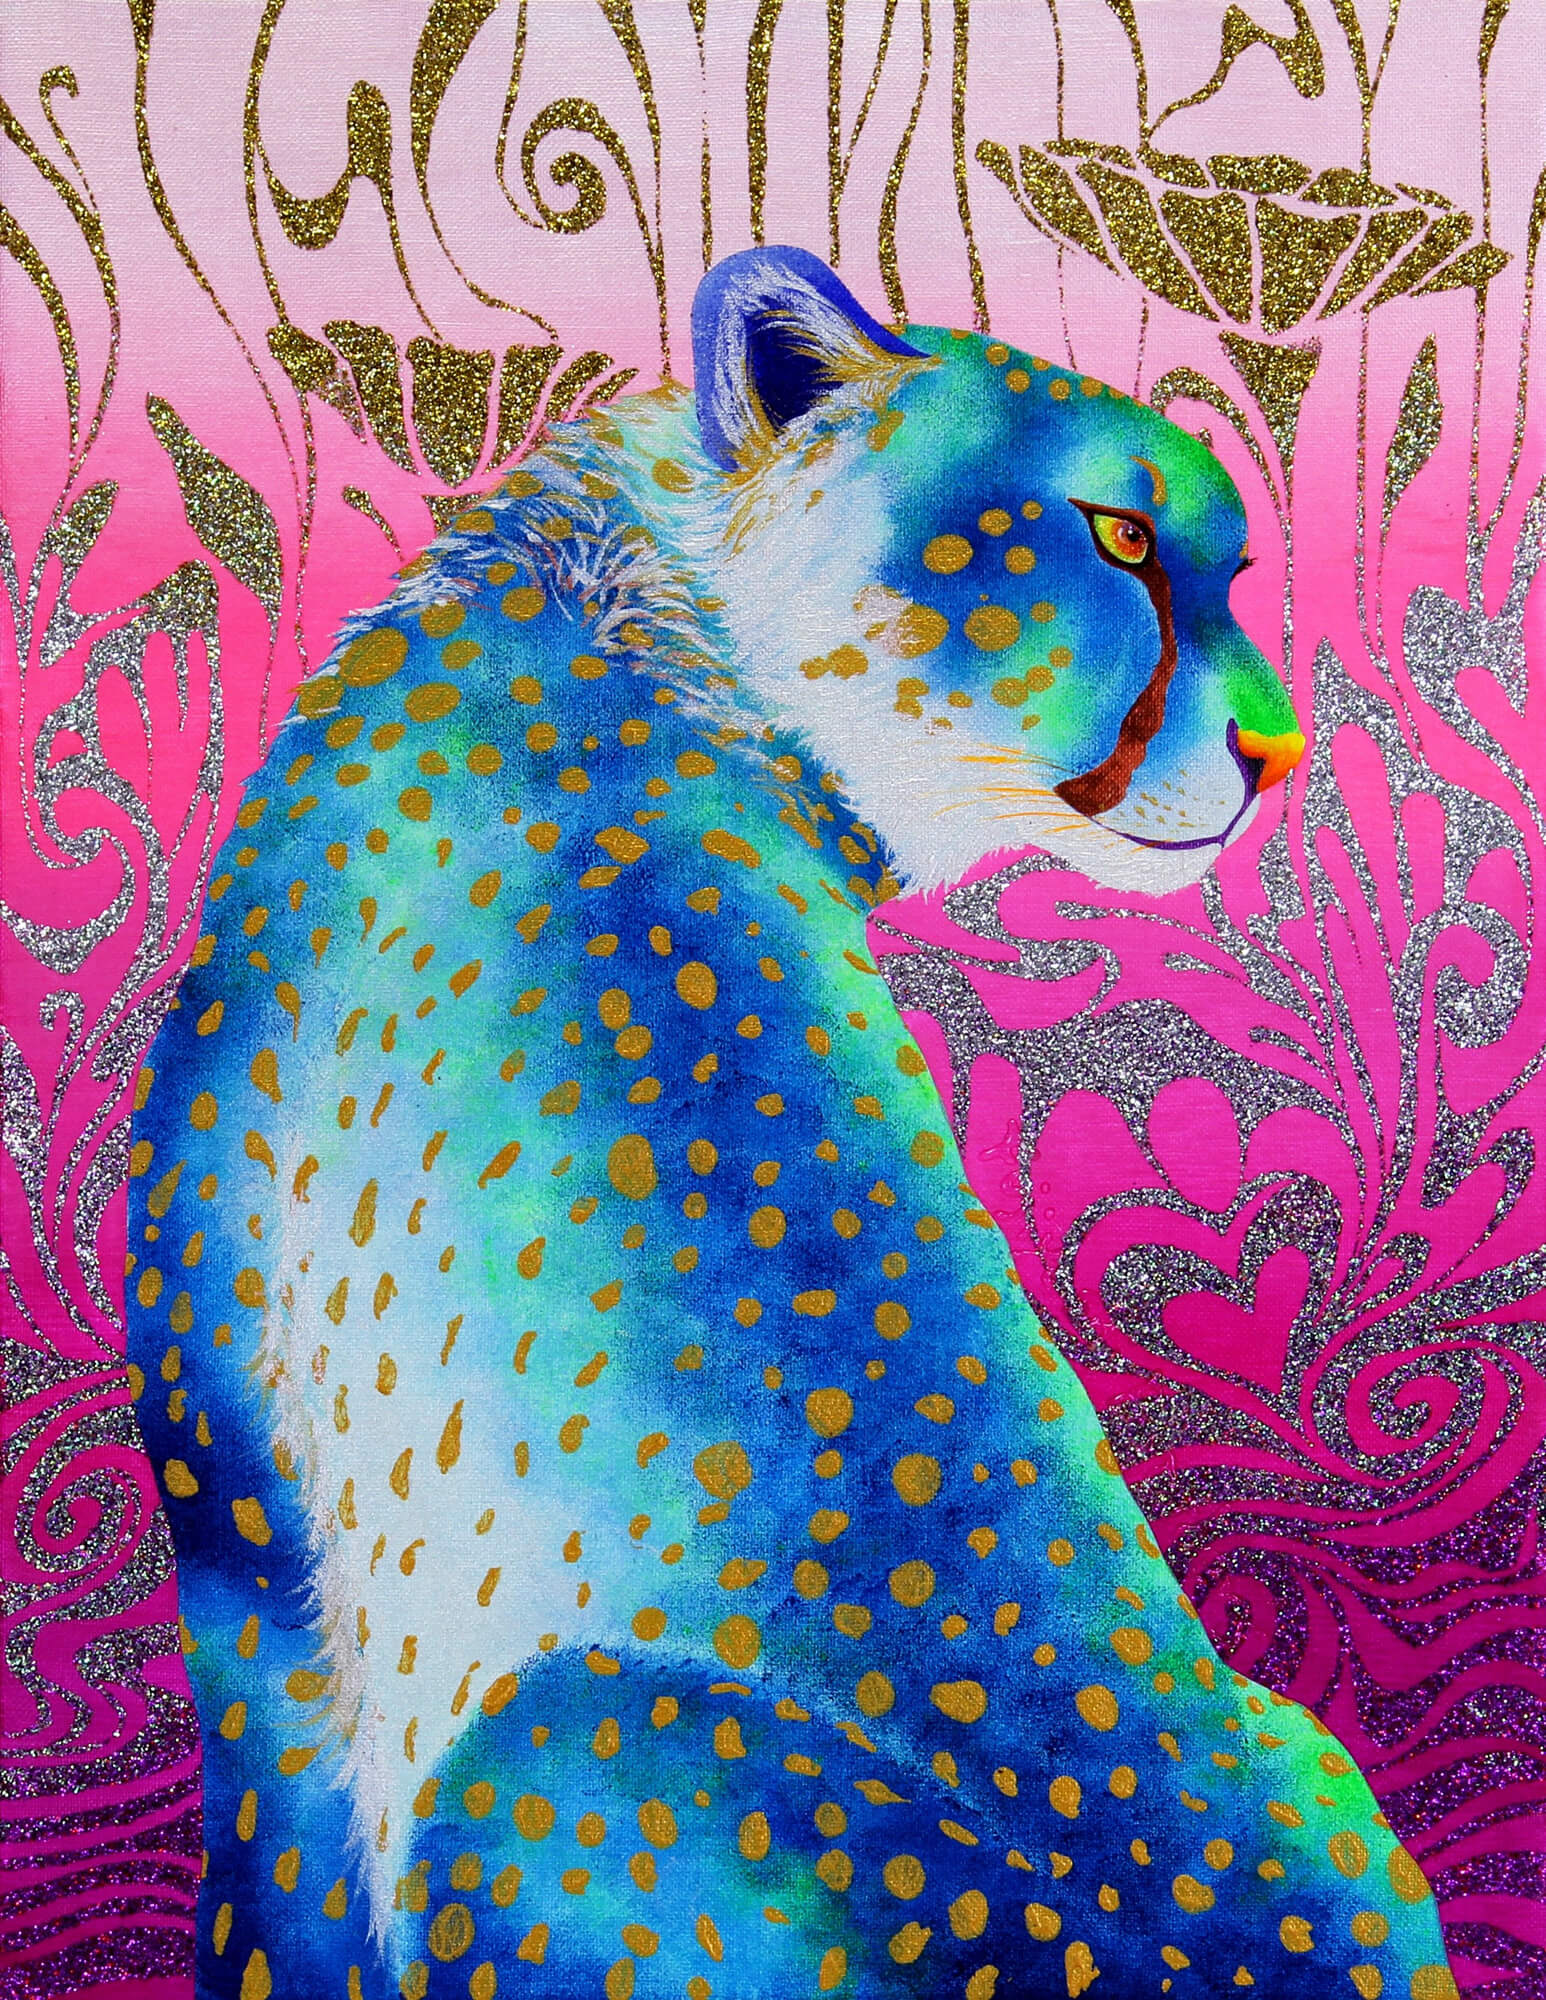 Blue Cheetah and illusion改行
Acrylic and glitter on canvas,410×318mm, 2016